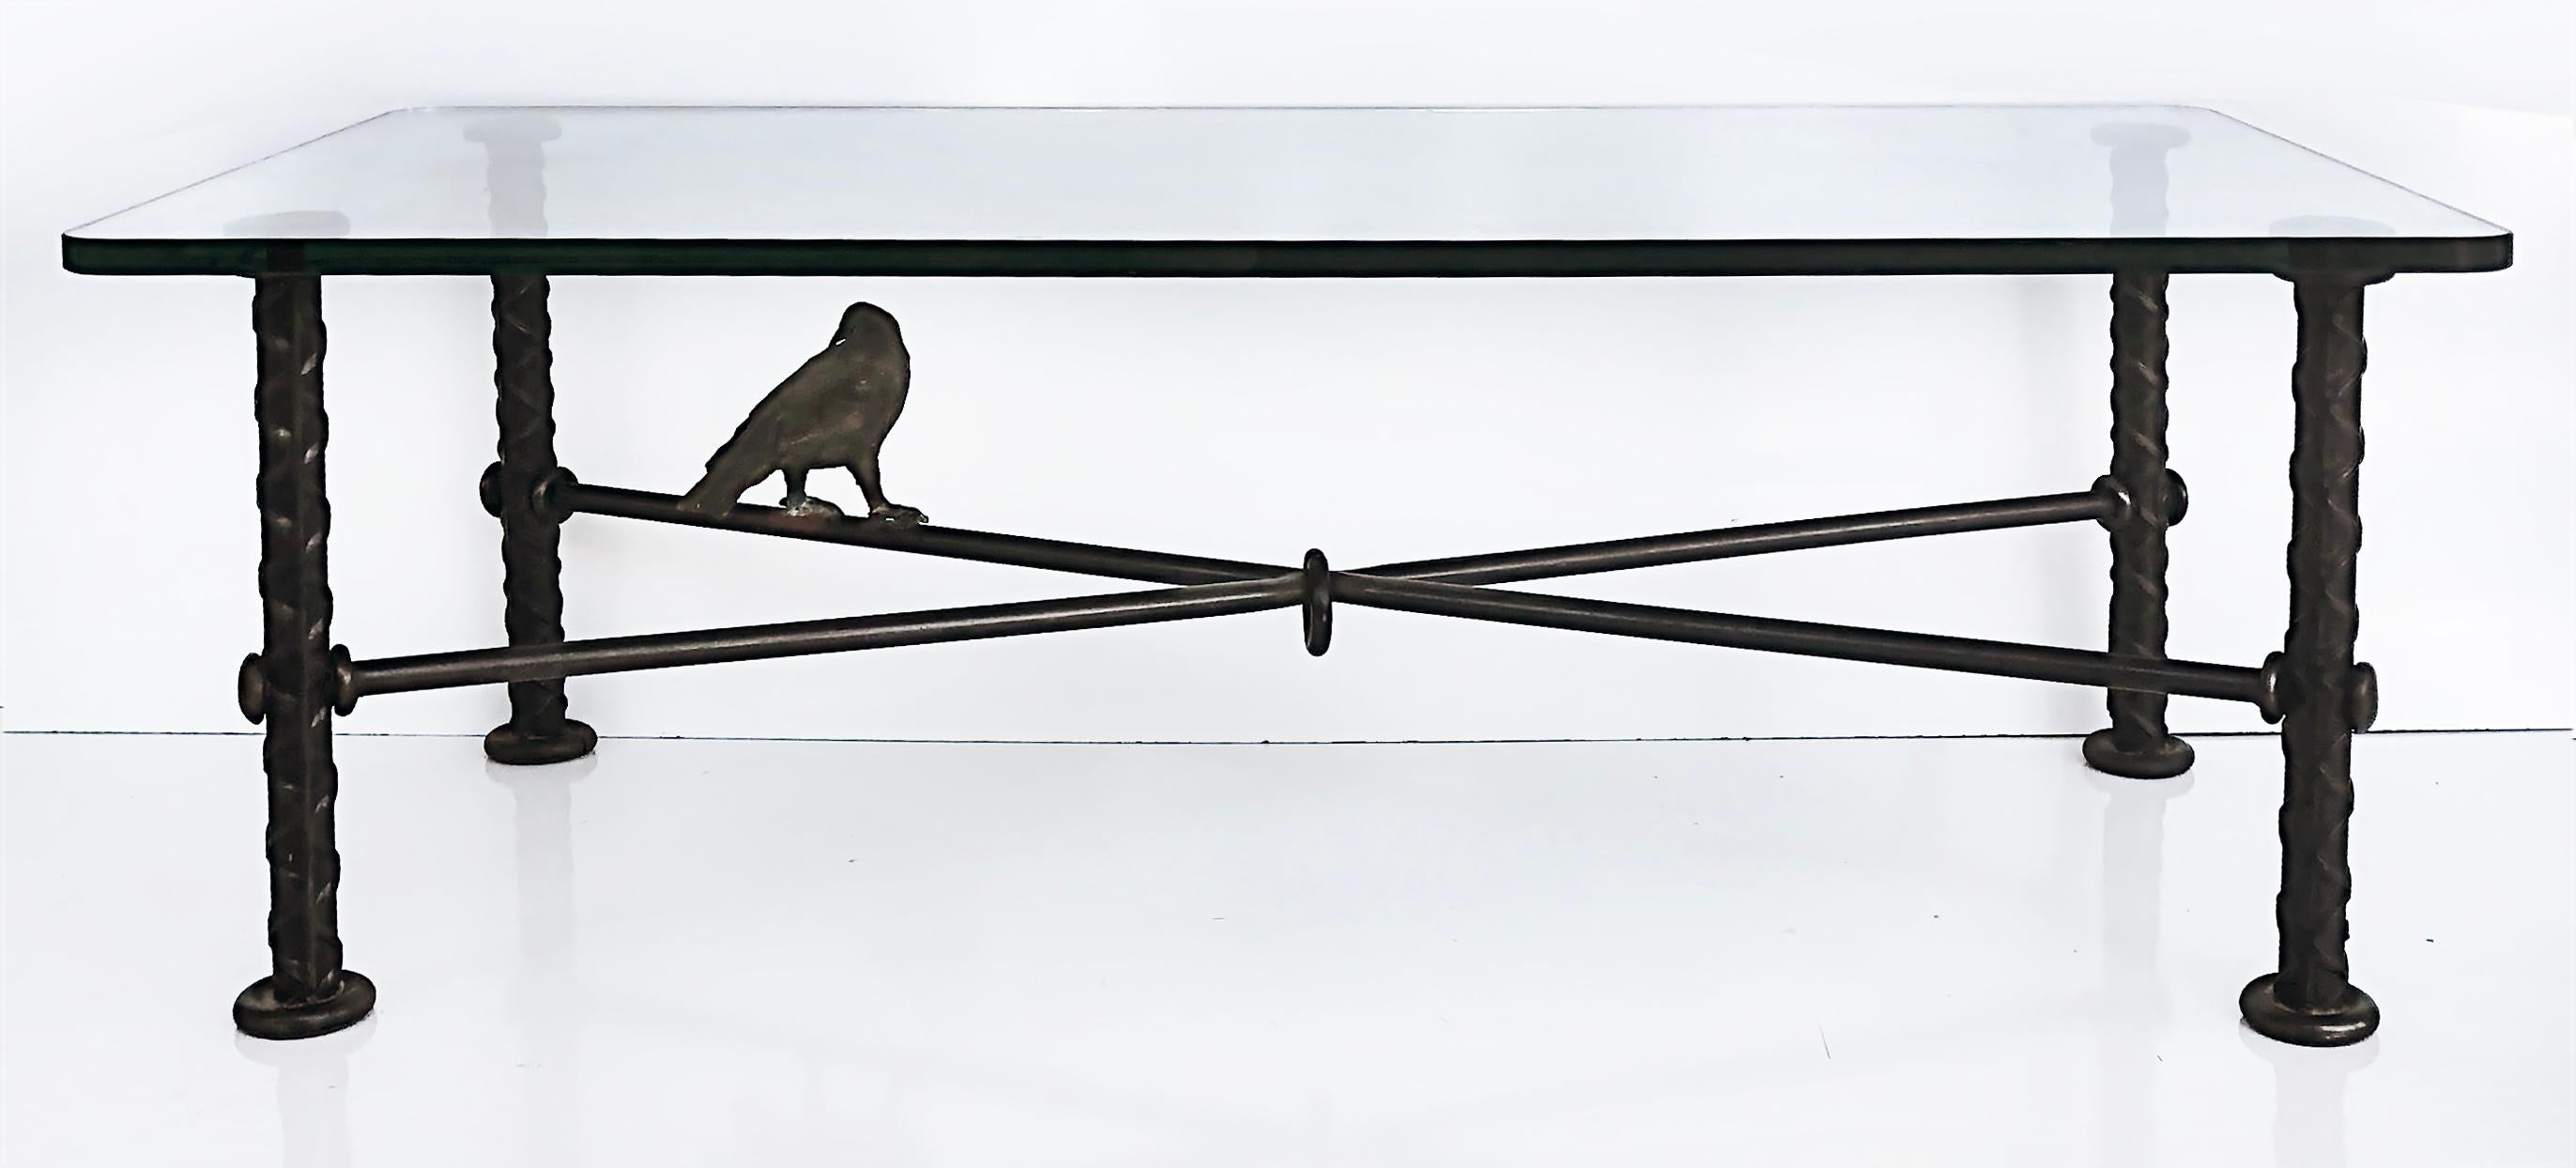 Ilana Goor Brutalist wrought iron bird coffee table, signed and numbered.

Offered for sale is a limited edition brutalist wrought iron coffee table by the Israeli/American artist Ilana Goor (born 1936). The table is signed by the artist and